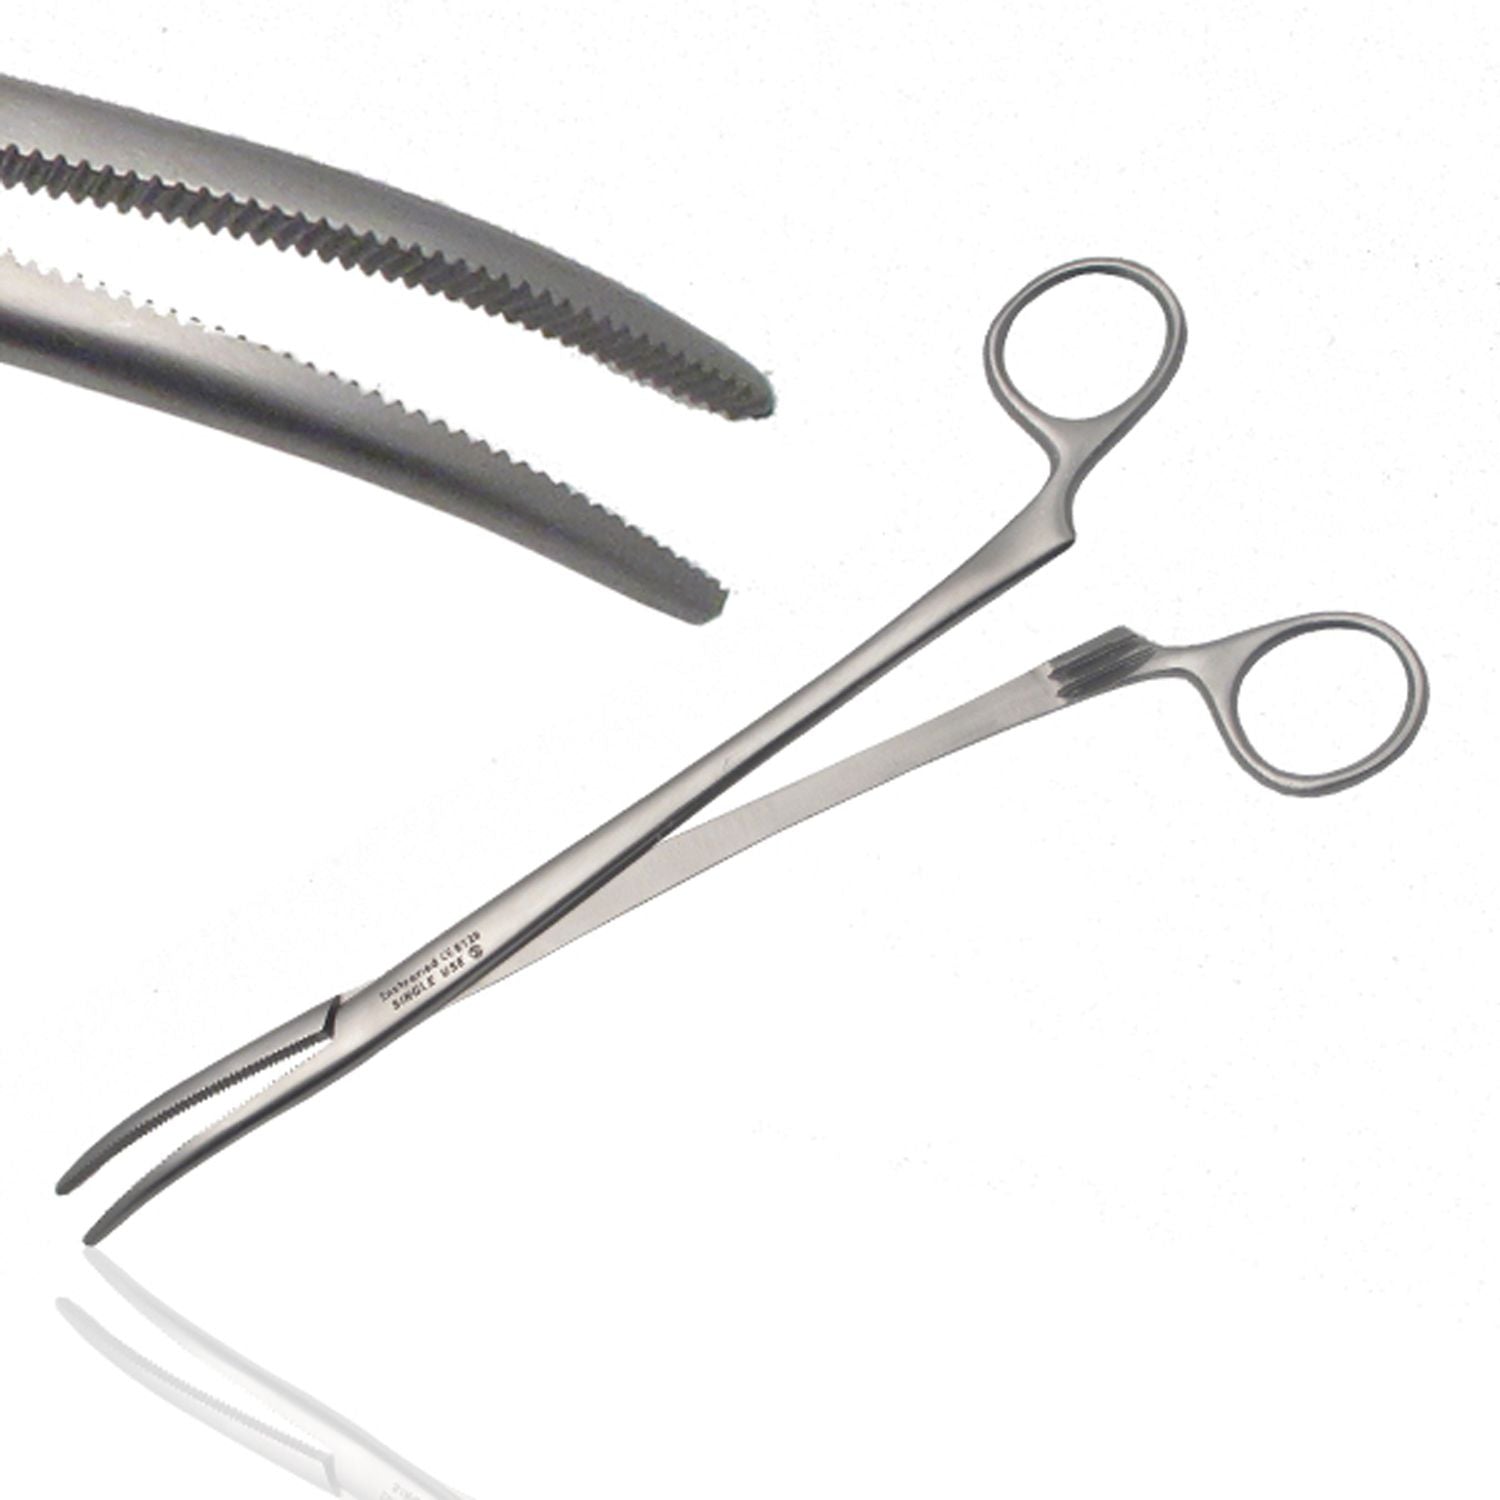 Instramed Artery Roberts Forceps | Curved | 22.5cm | Single